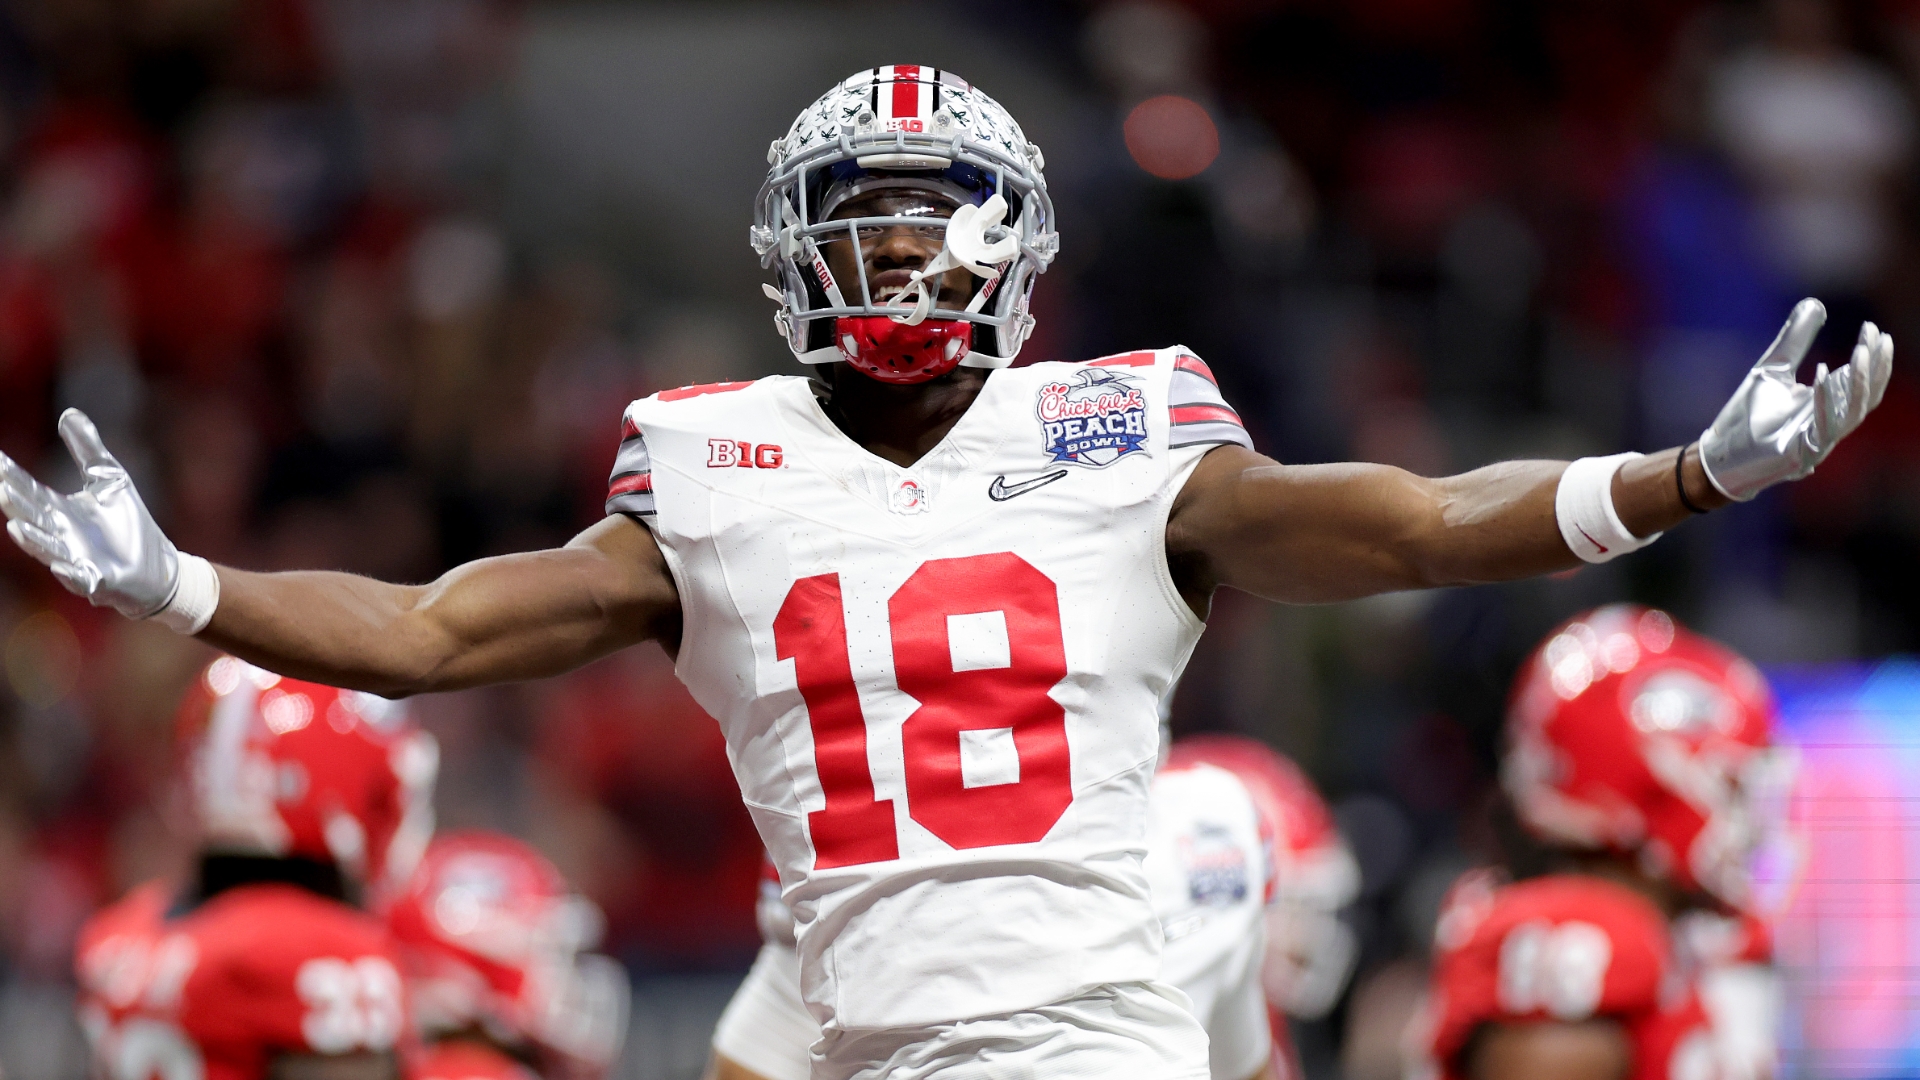 Who are the top WRs in college football? Stream the Video Watch ESPN